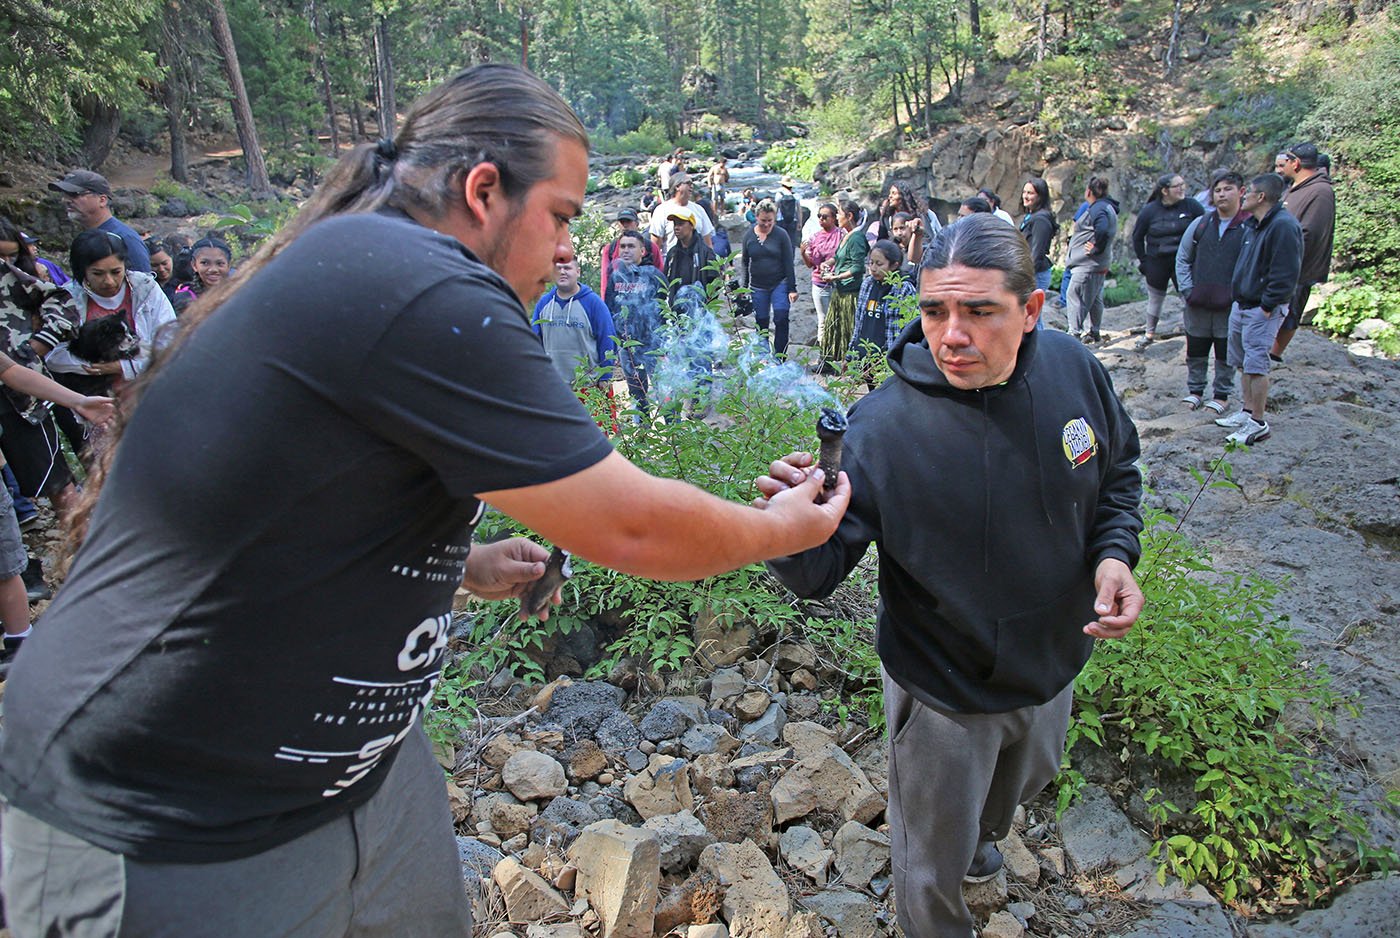  Lower McCloud River Falls, CA —  A root used for smudging is passed along. The smoke is used to purify members of the group before starting the “Salmon Challenge.” July 10, 2019. Tom Levy/The Spiritual Edge 